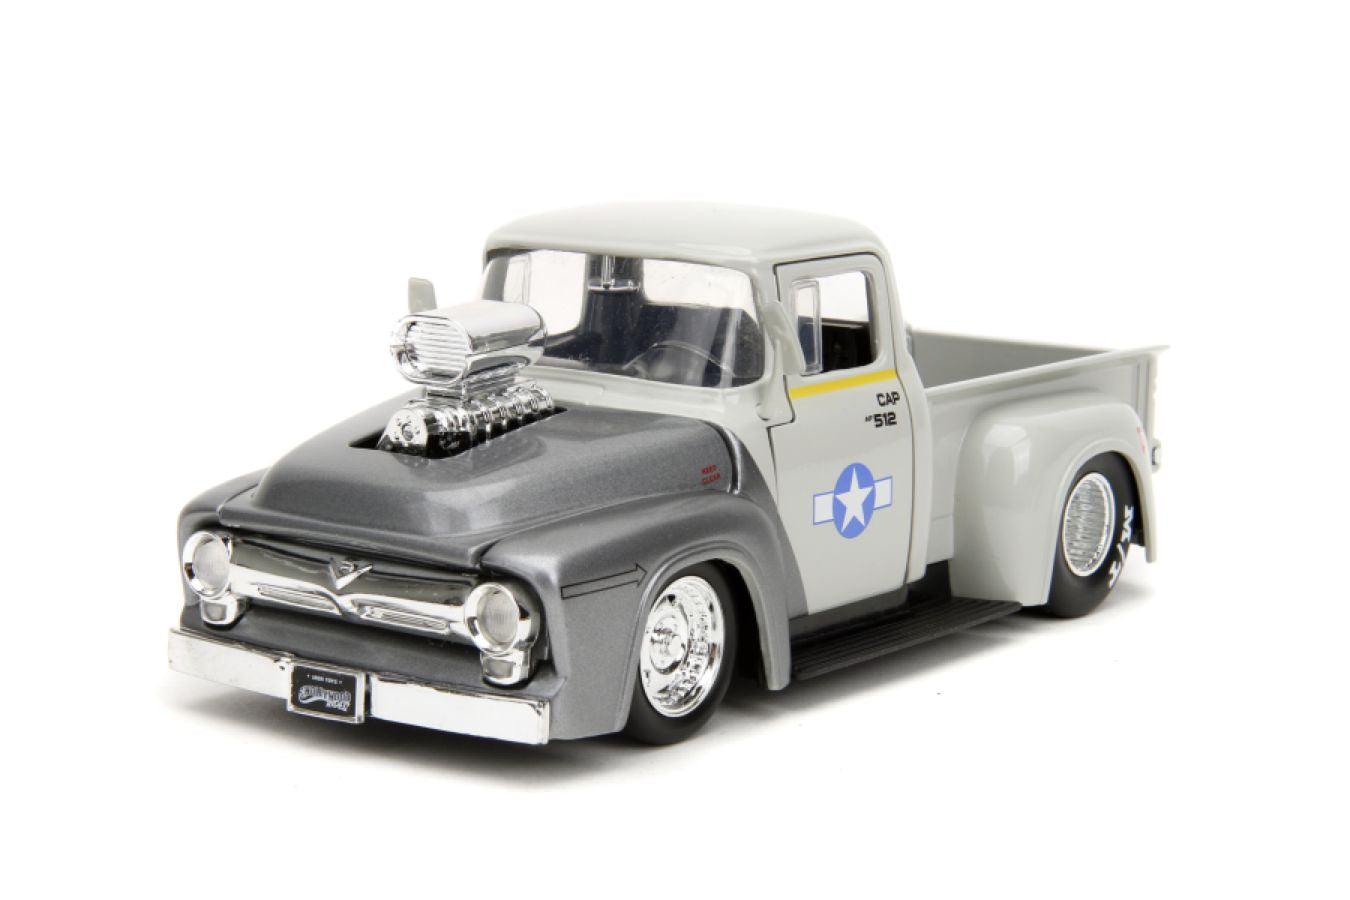 JAD34373 Street Fighter - Ford F-100 (1956) 1:24 with Guile Figure Hollywood Rides Diecast Vehicle - Jada Toys - Titan Pop Culture